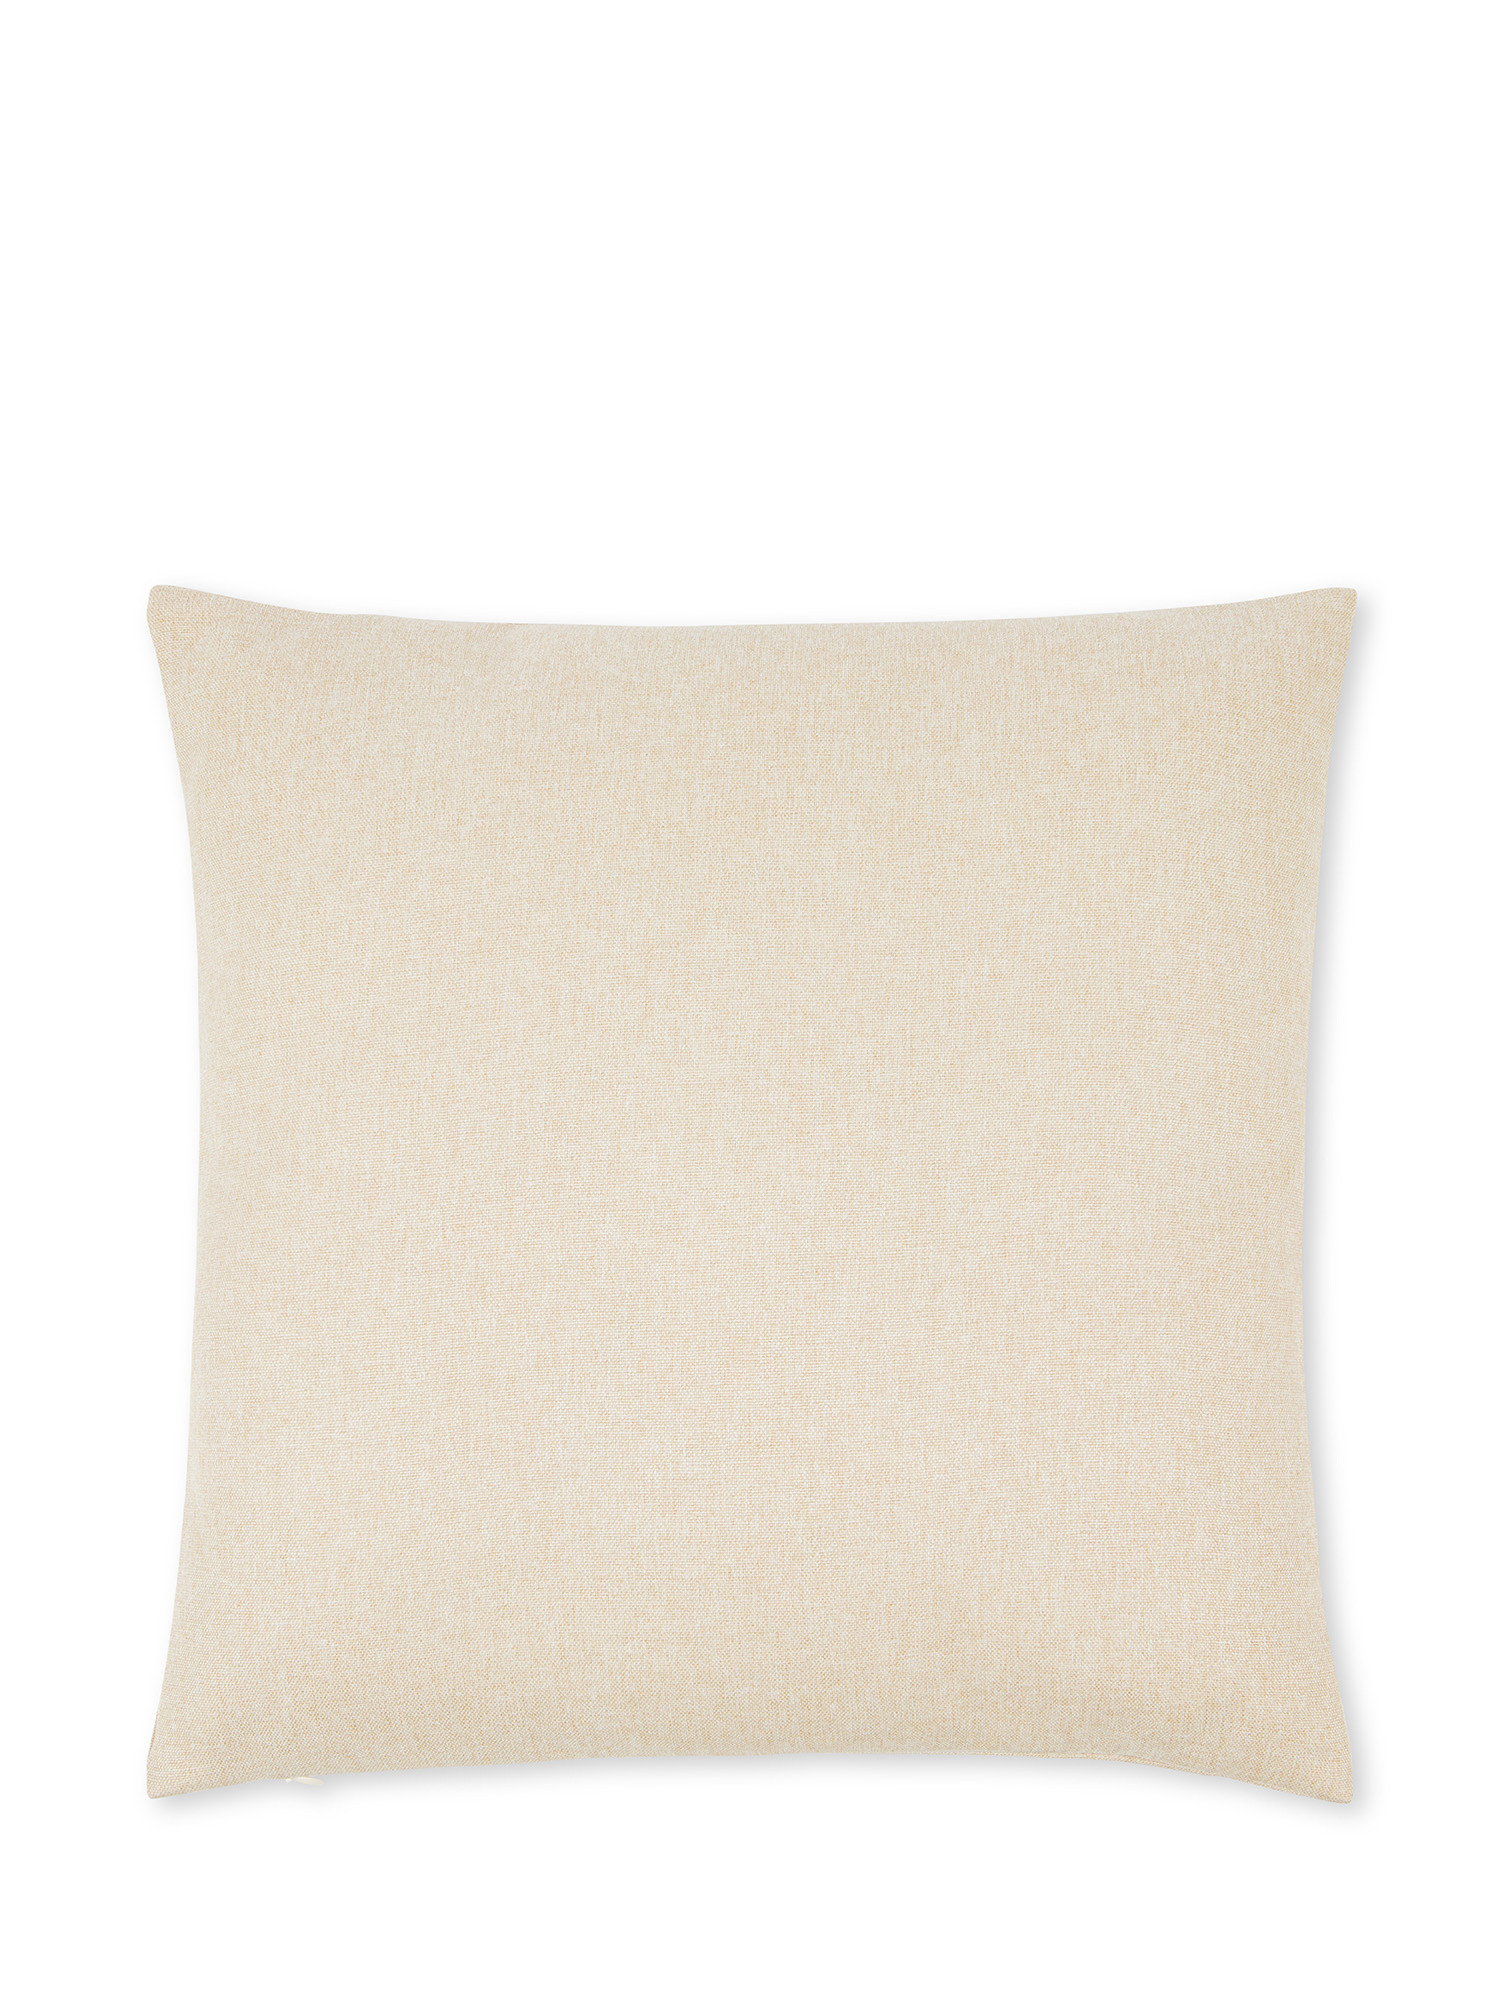 Cuscino tessuto teddy con ricami 45x45cm, Beige, large image number 1